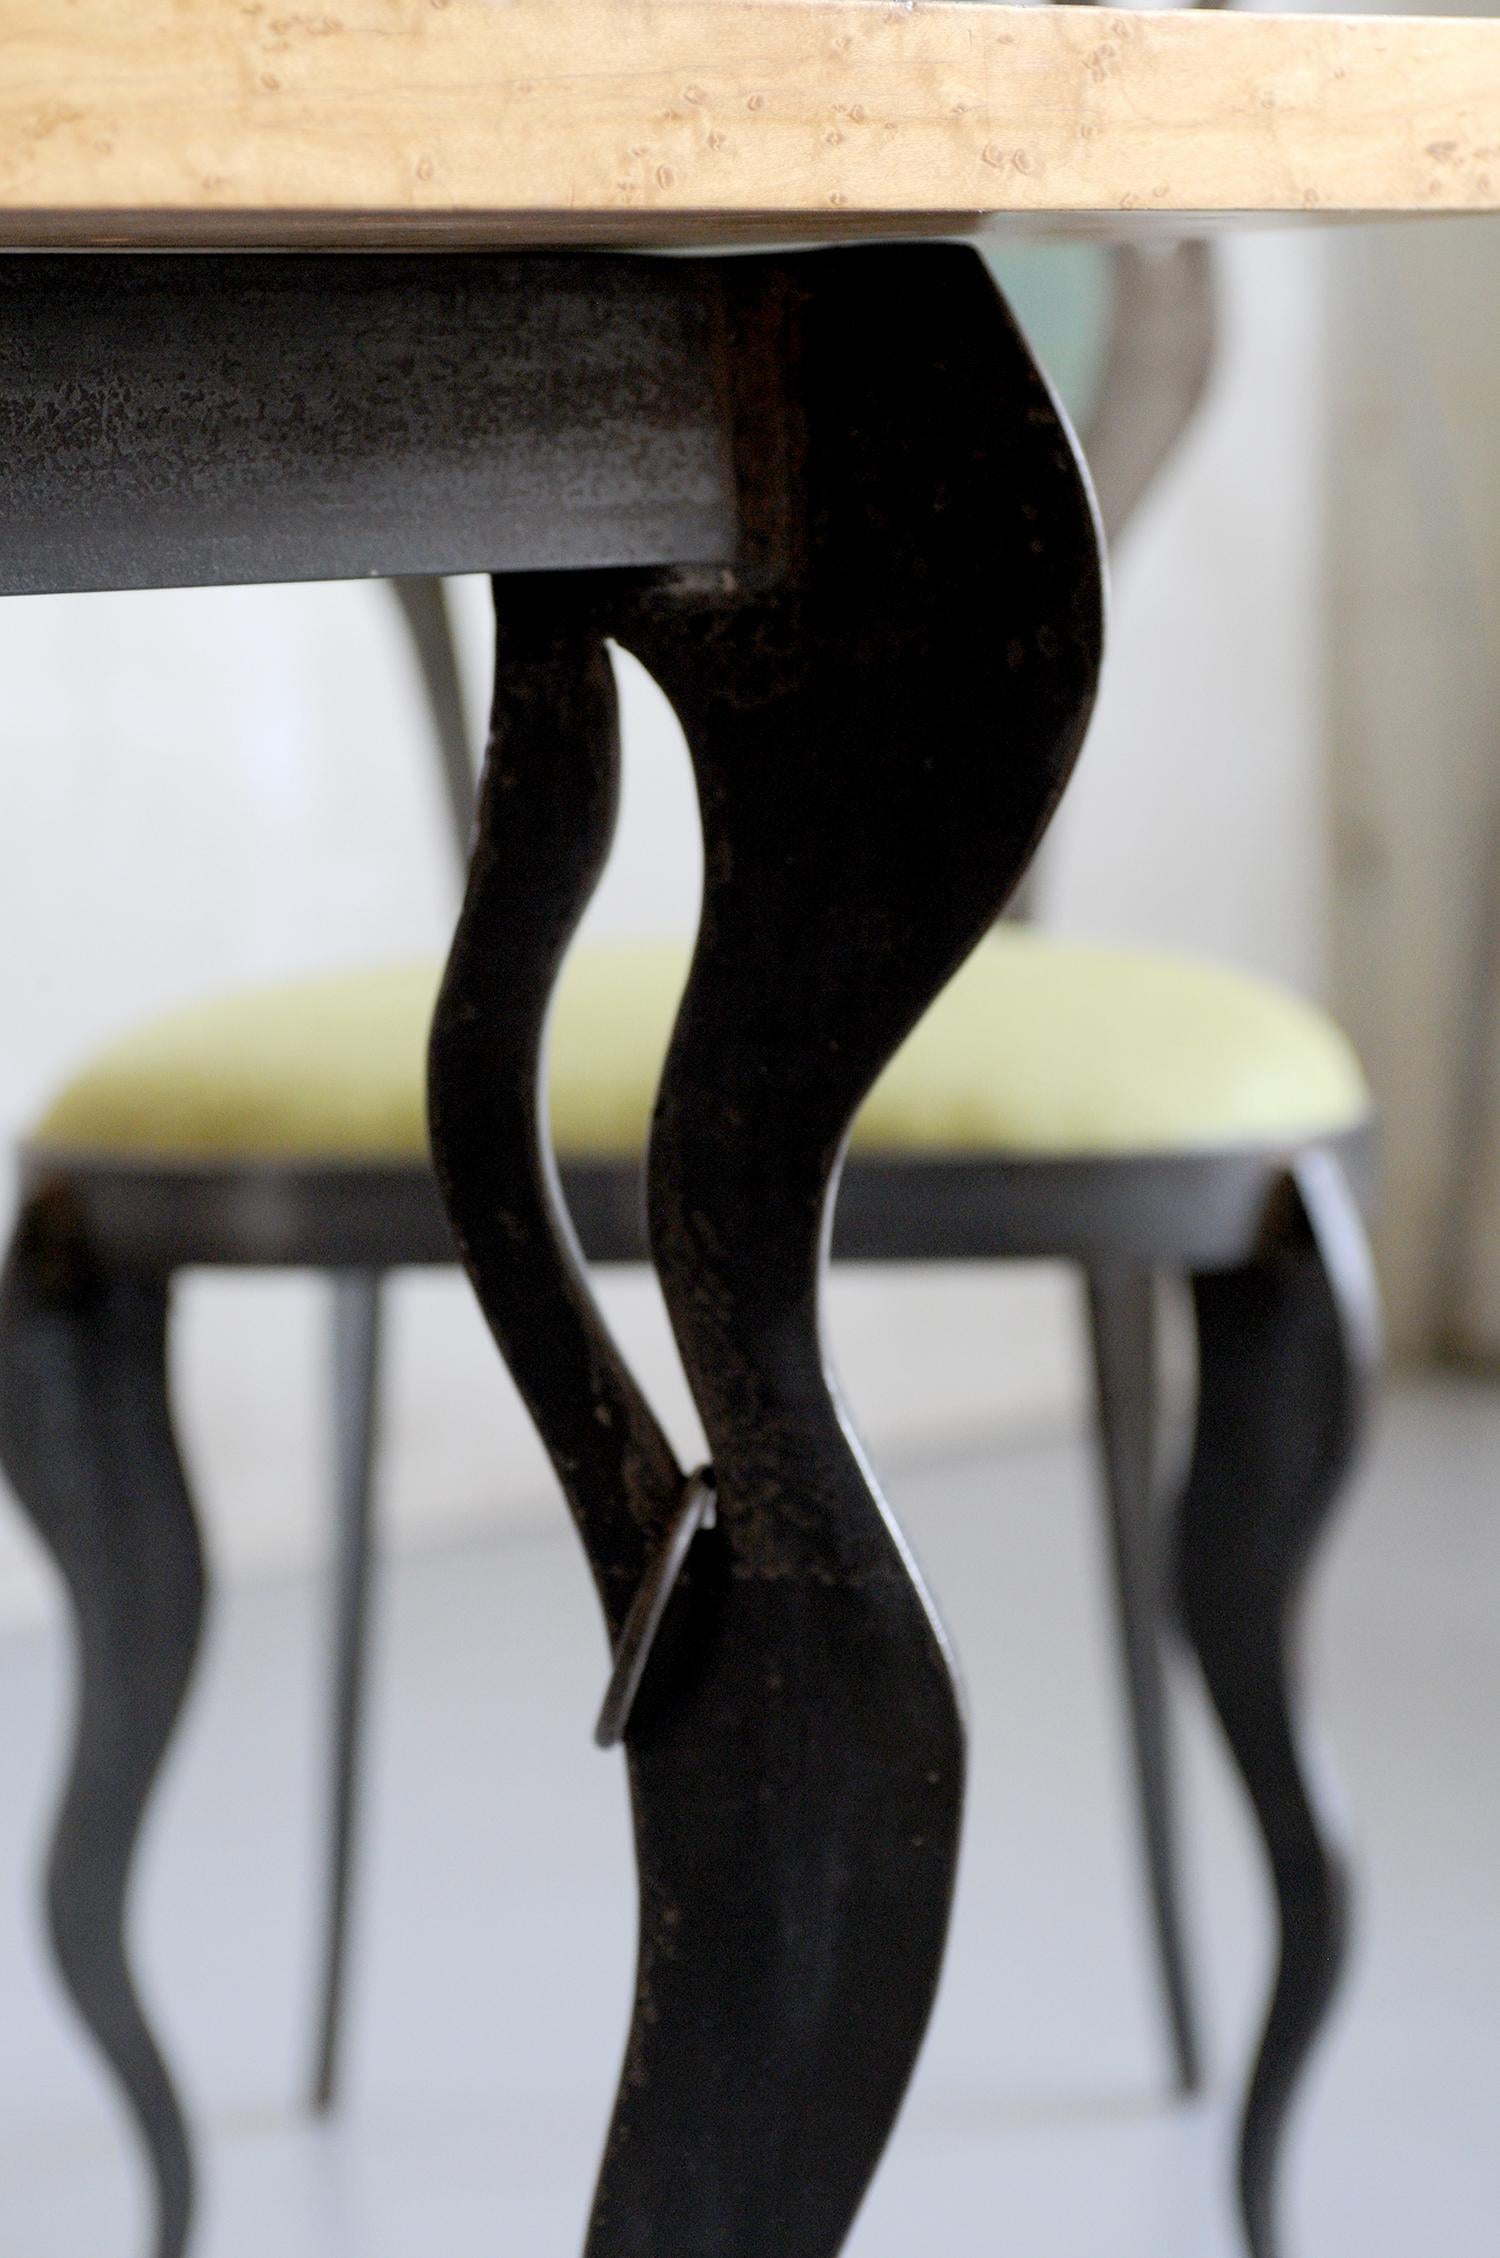 Atelier S.L Prestige, Biot, France 2012. Set composed of a wrought iron and patinated iron table, chapped and speckled maple top accompanied by its two chairs. The thick iron bases are lively and perforated, 4 rings adorn the table. Unique pieces,